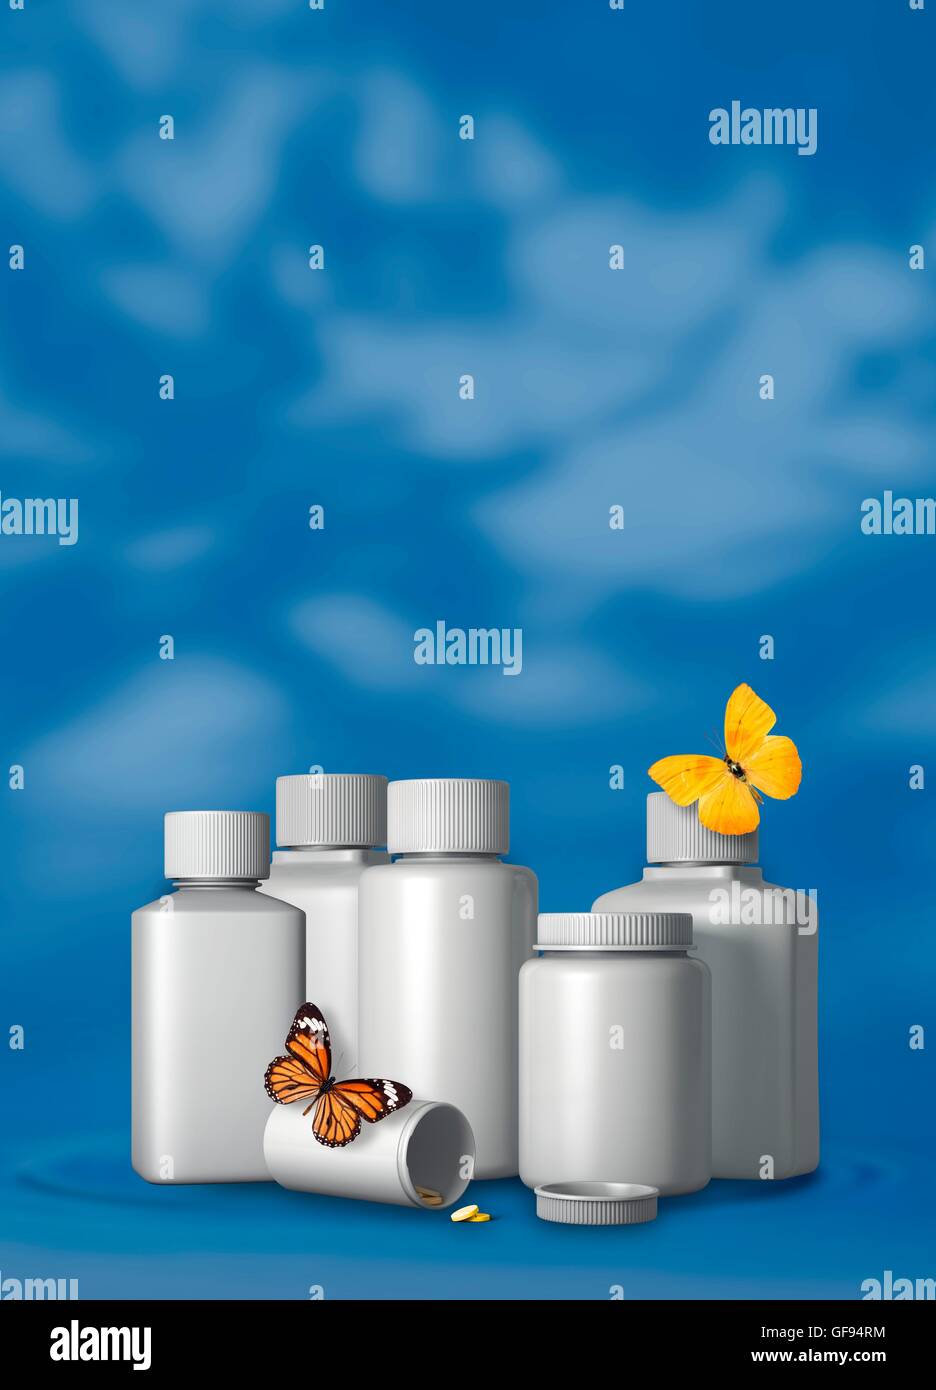 Generic pill bottles and butterflies, illustration. Stock Photo